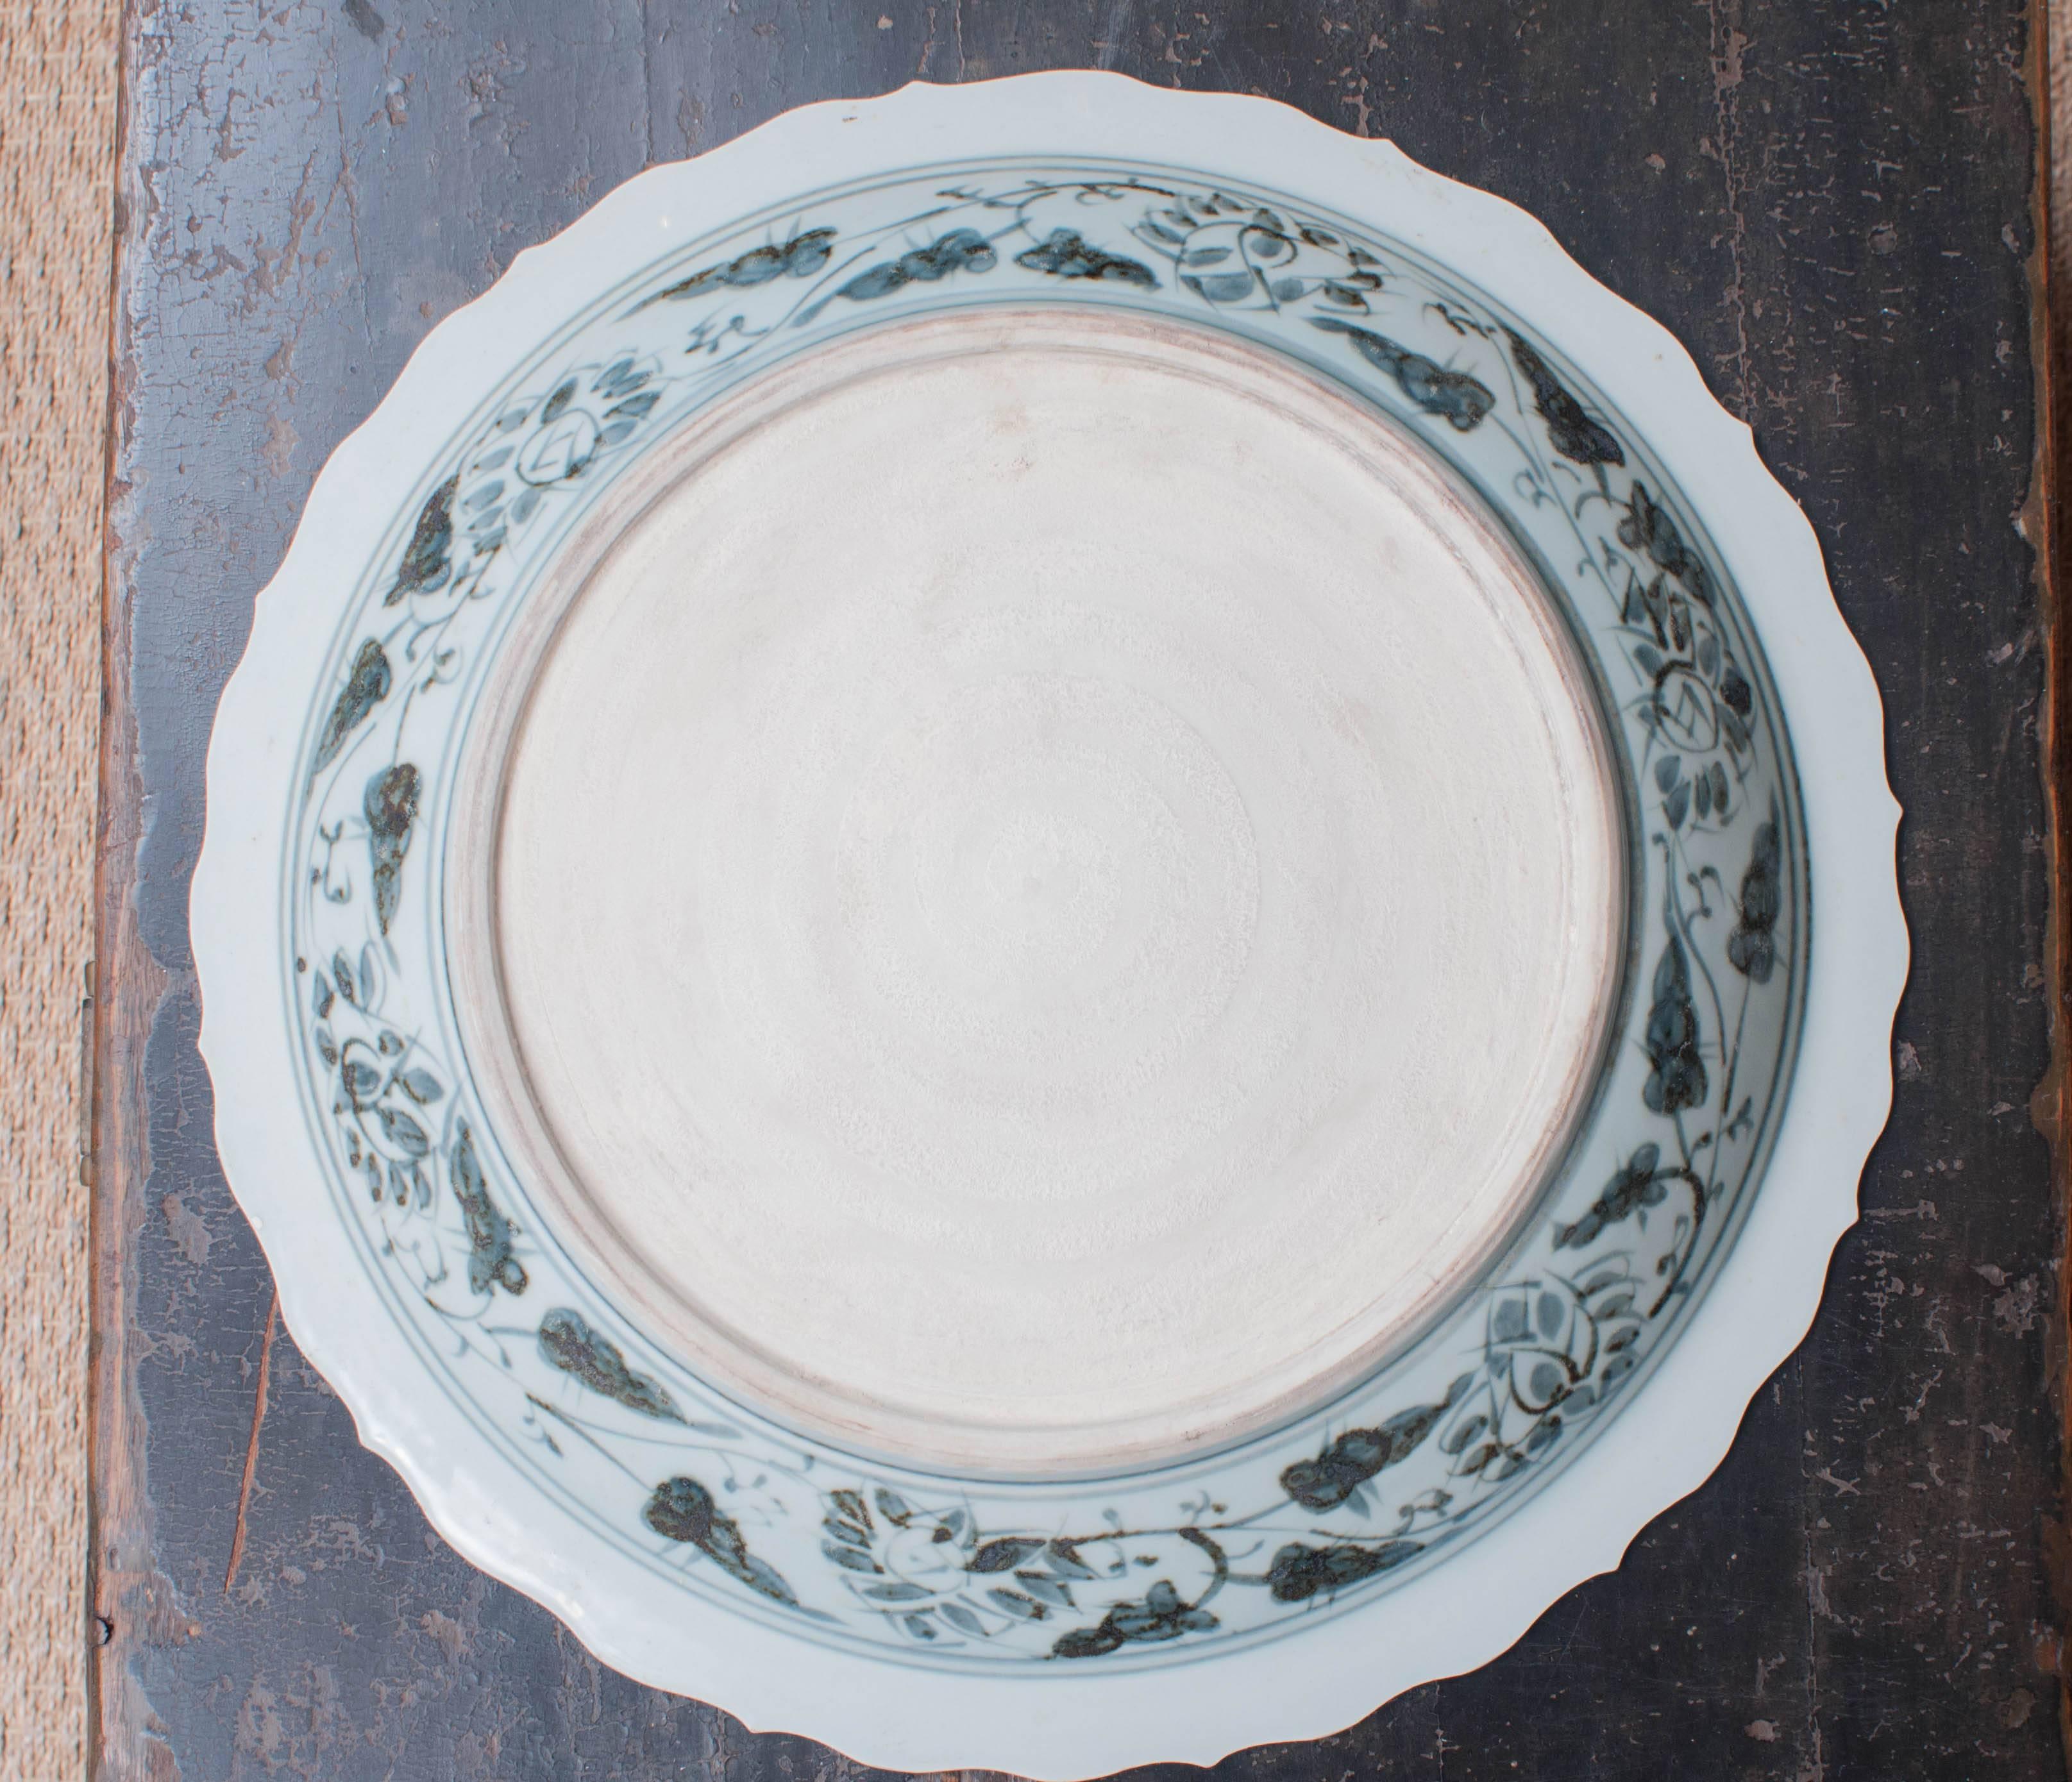 Ming Dynasty Style Chinese Porcelain Charger In Excellent Condition For Sale In Washington, DC